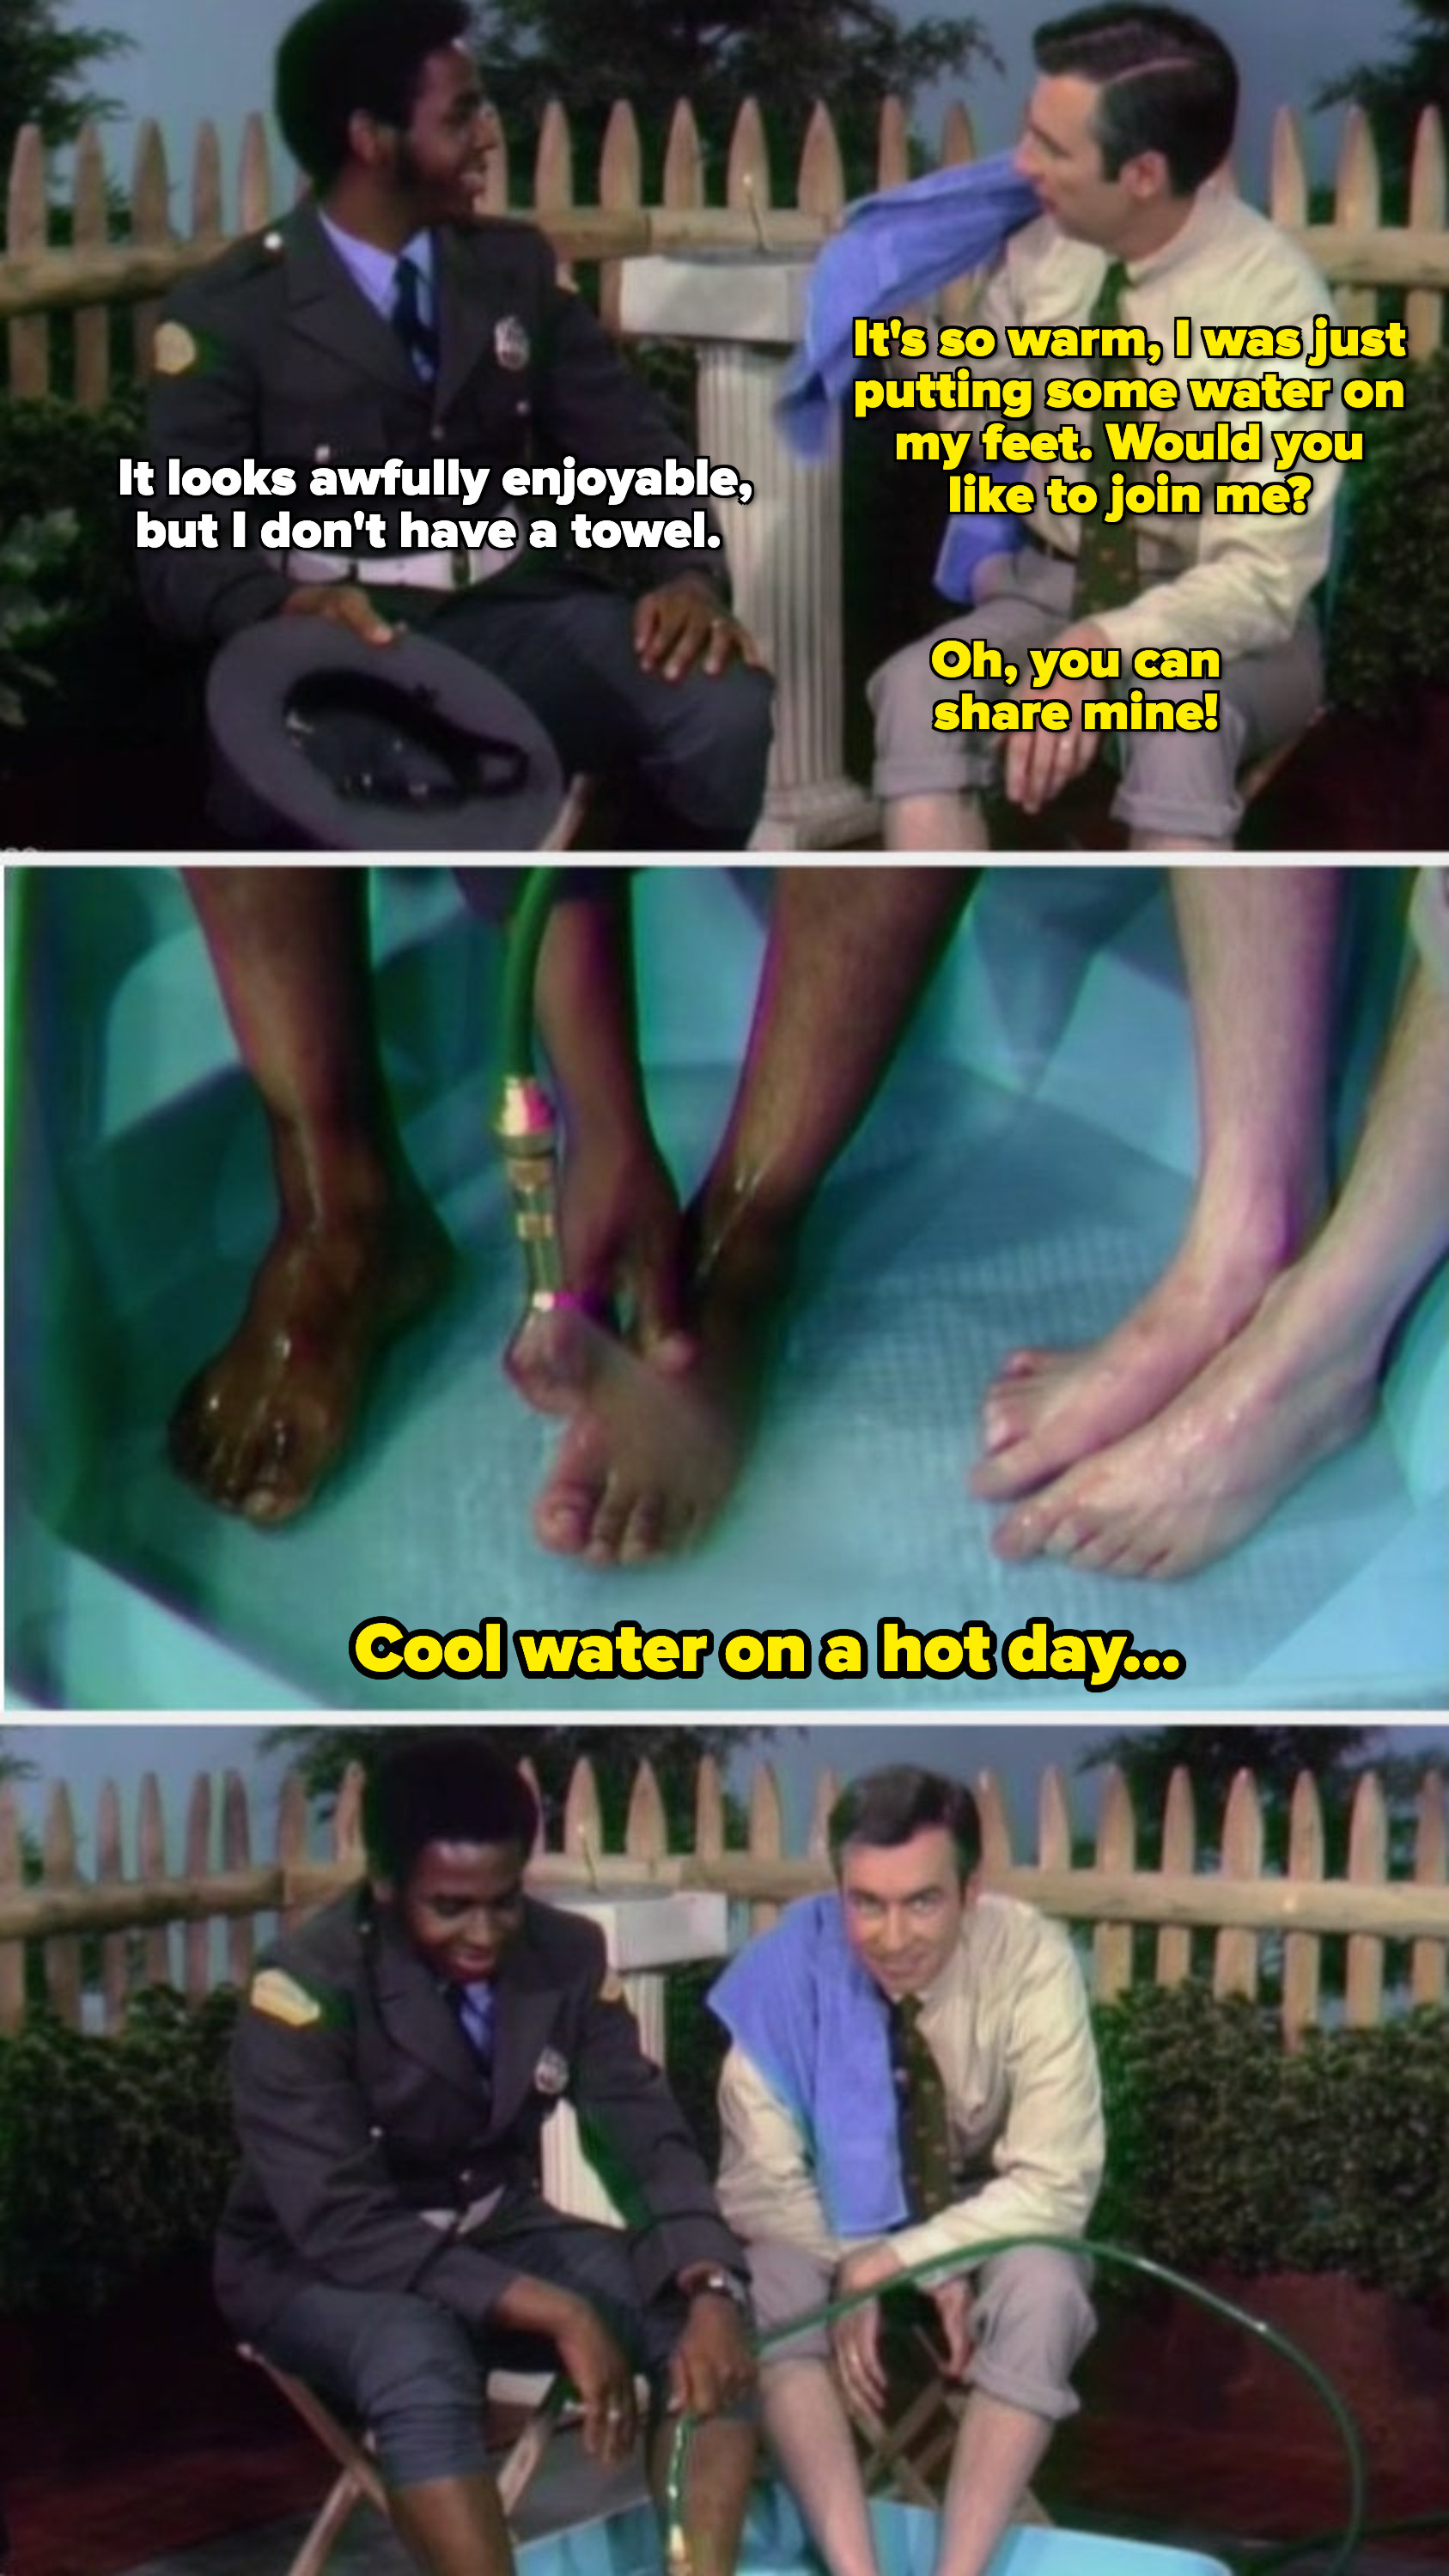 Mister Rogers and Officer Clemmons washing their feet together in the same pool, and sharing the same towel